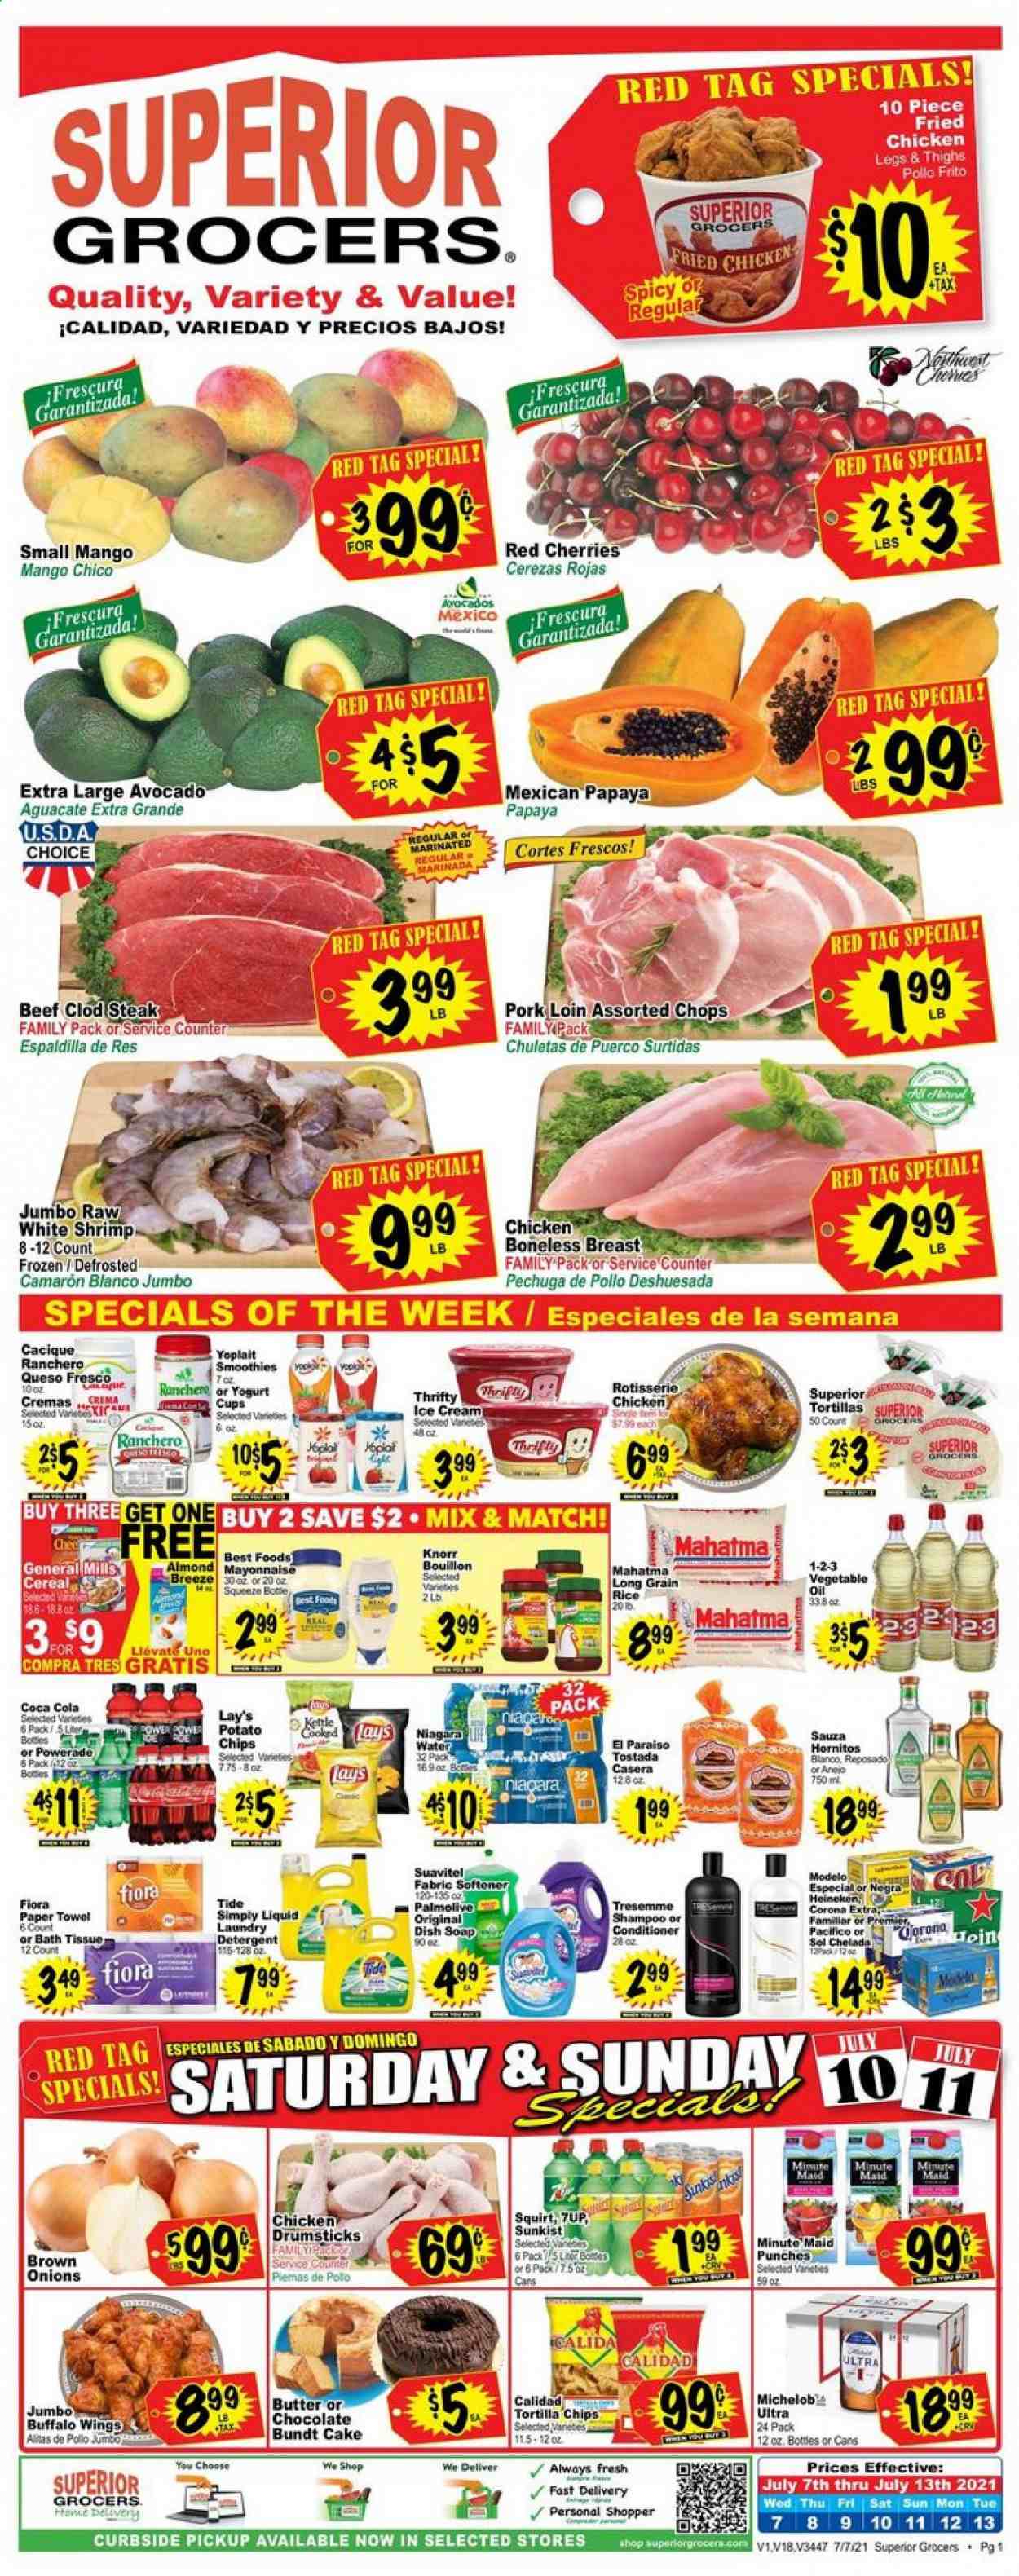 thumbnail - Superior Grocers Flyer - 07/07/2021 - 07/13/2021 - Sales products - Michelob, cake, bundt, onion, mango, cherries, papaya, chicken drumsticks, steak, pork loin, pork meat, shrimps, chicken roast, Knorr, fried chicken, queso fresco, yoghurt, Yoplait, butter, mayonnaise, ice cream, tortilla chips, Lay’s, bouillon, cereals, rice, long grain rice, vegetable oil, oil, Coca-Cola, Powerade, 7UP, fruit punch, smoothie, beer, Corona Extra, Heineken, Modelo, Tide, fabric softener, laundry detergent, Palmolive, conditioner, TRESemmé, cup. Page 1.